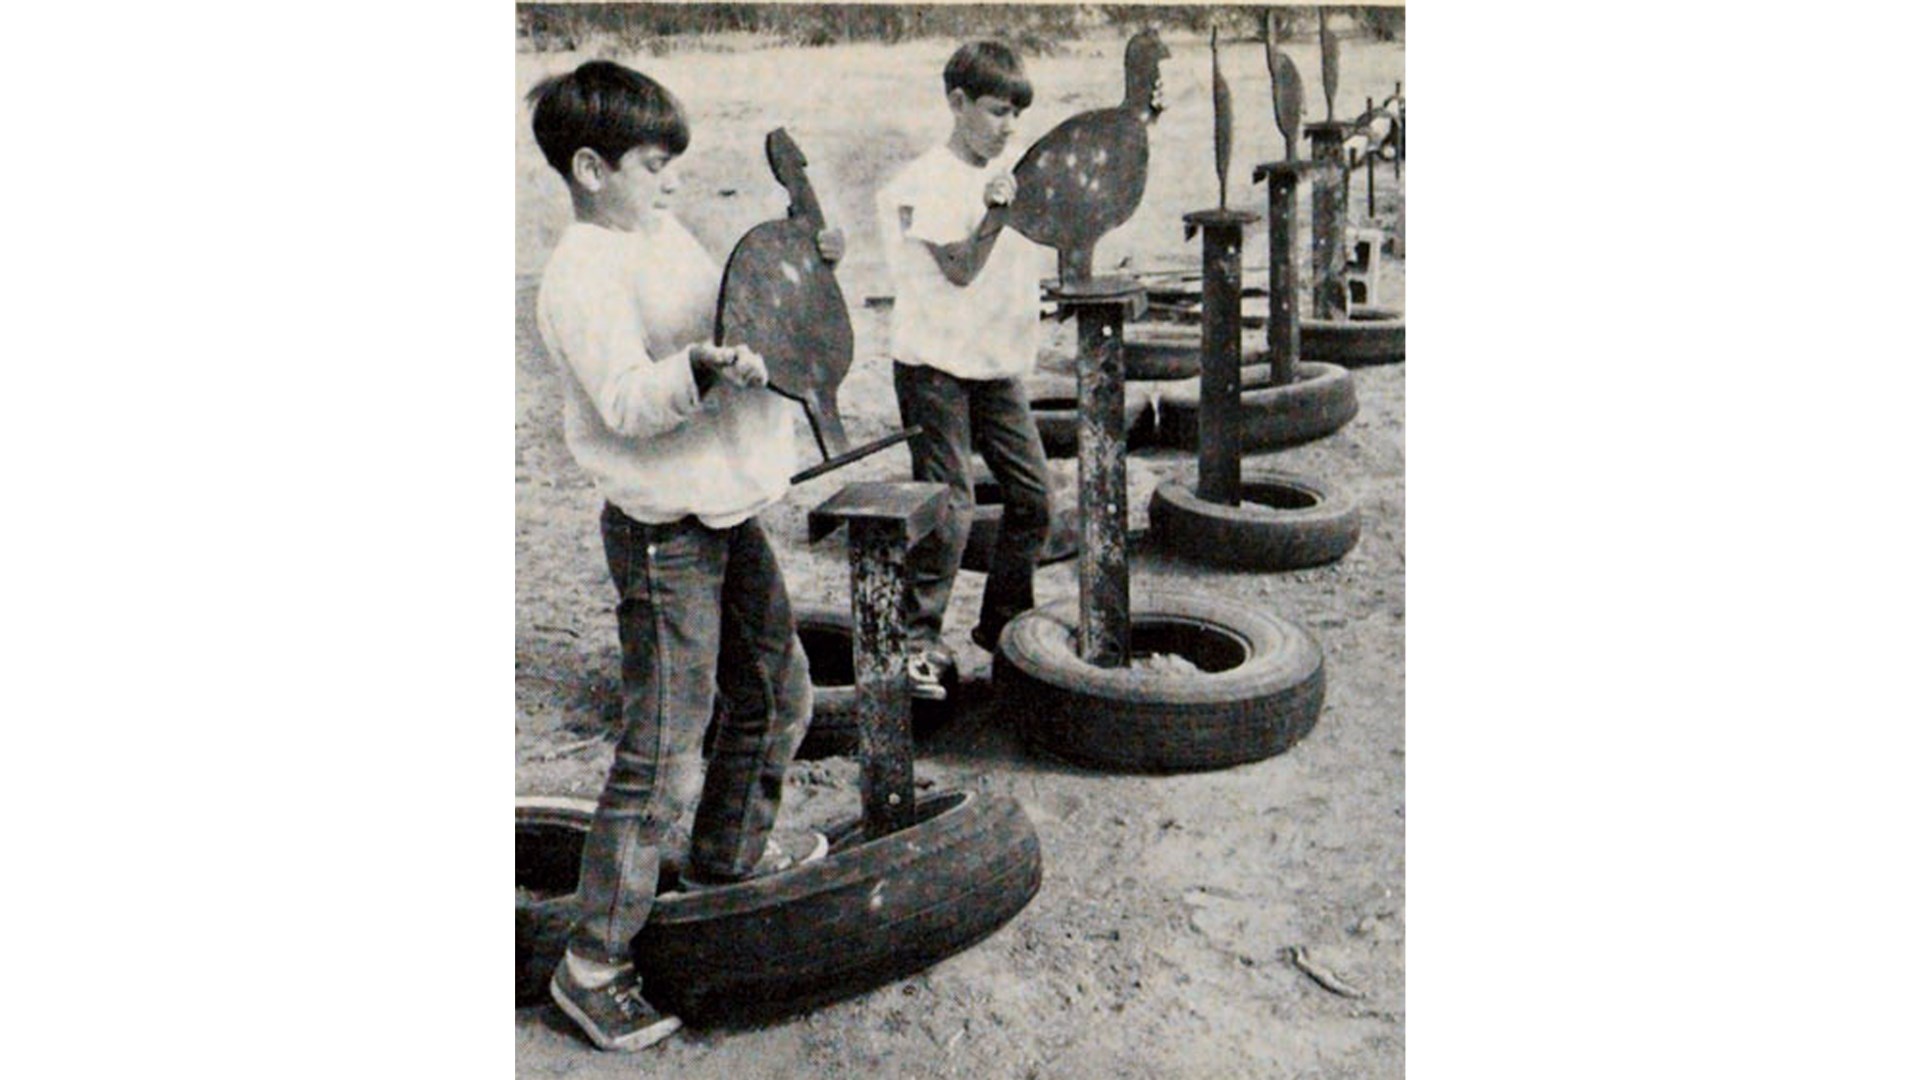 Youth vintage image boys hanging steel chicken targets tires outdoors